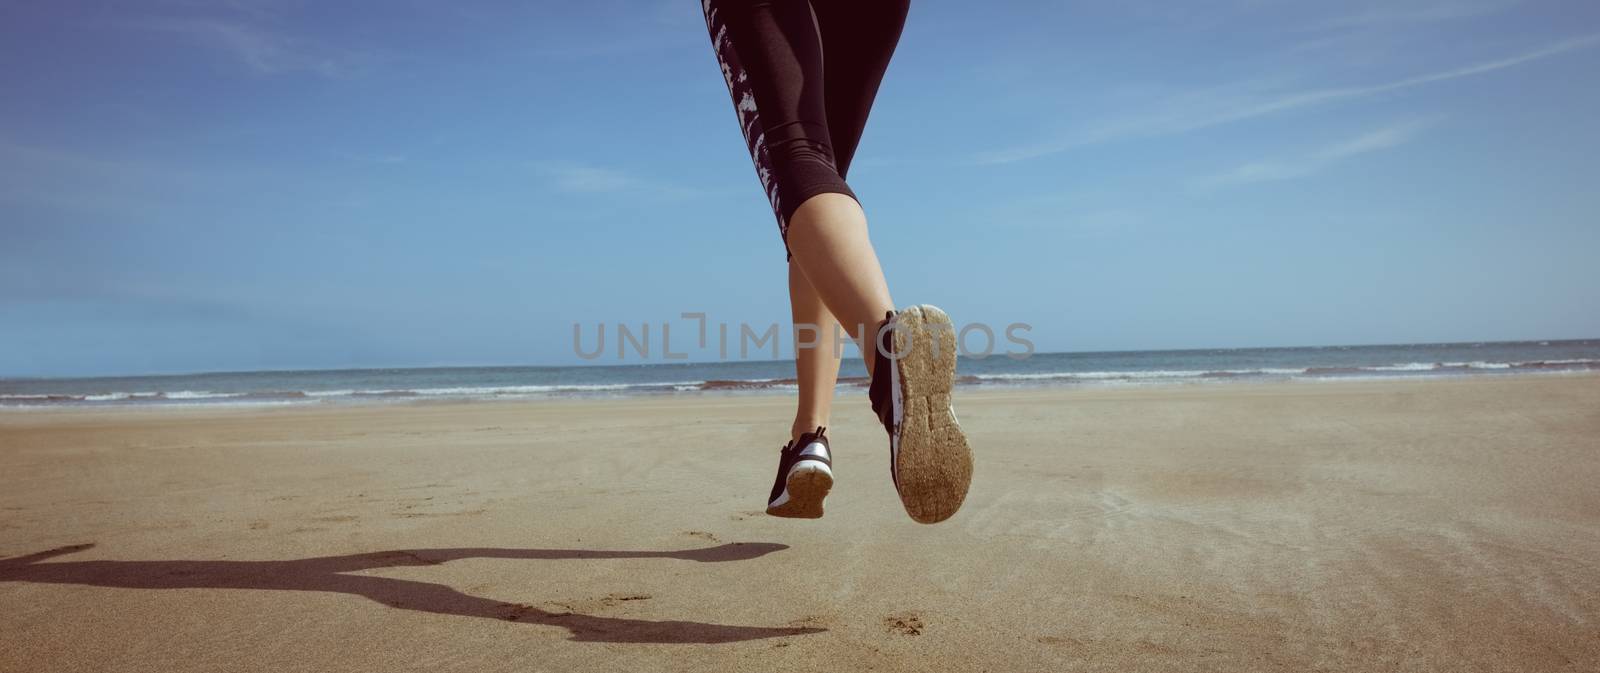 Fit woman jogging on the sand by Wavebreakmedia